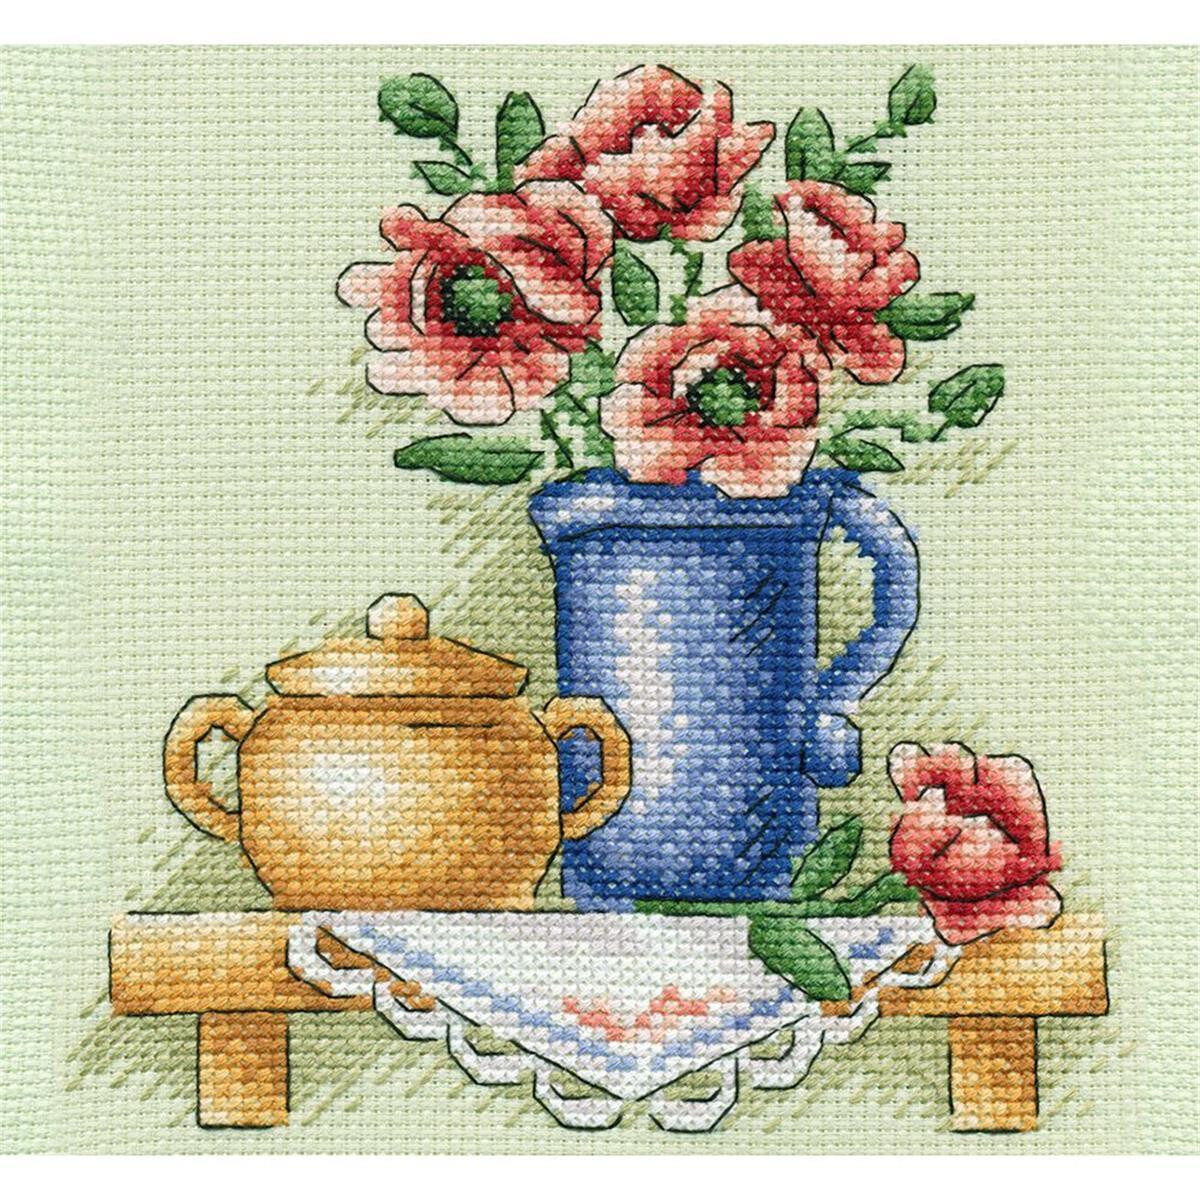 Panna counted cross stitch kit "Flowers in a...